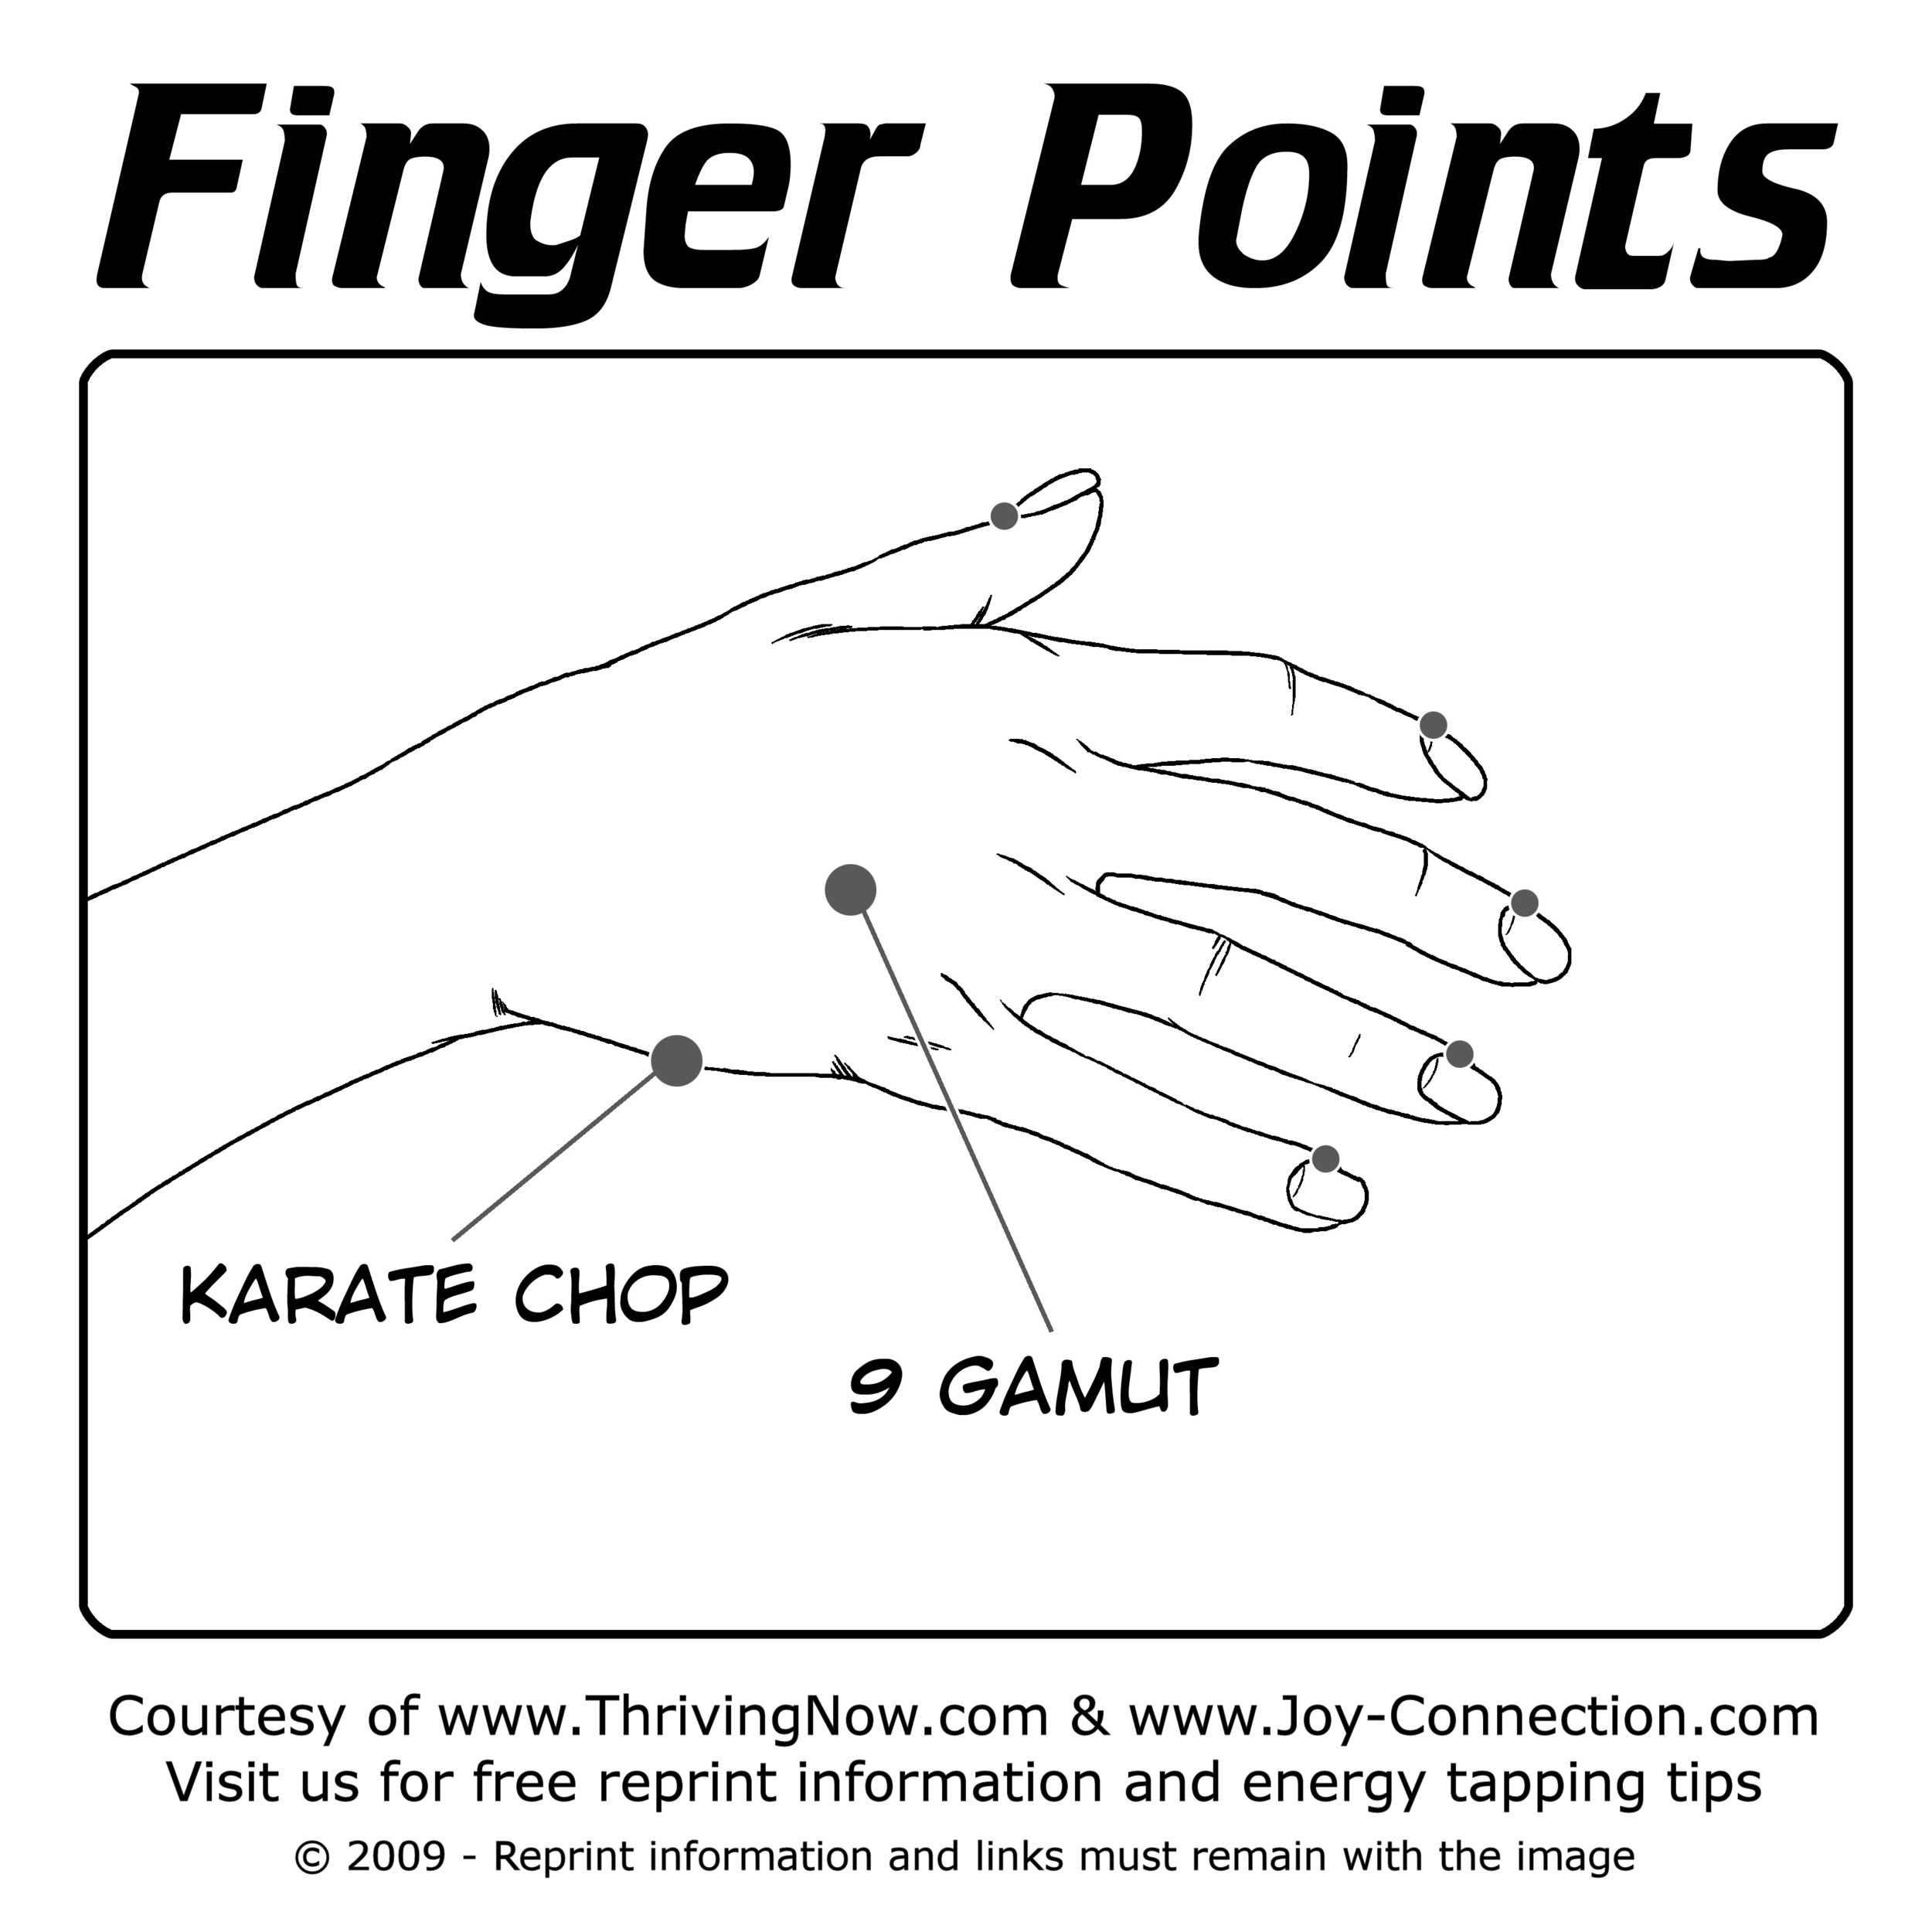 Energy-Tapping-Points-Fingers-3300x3300.png